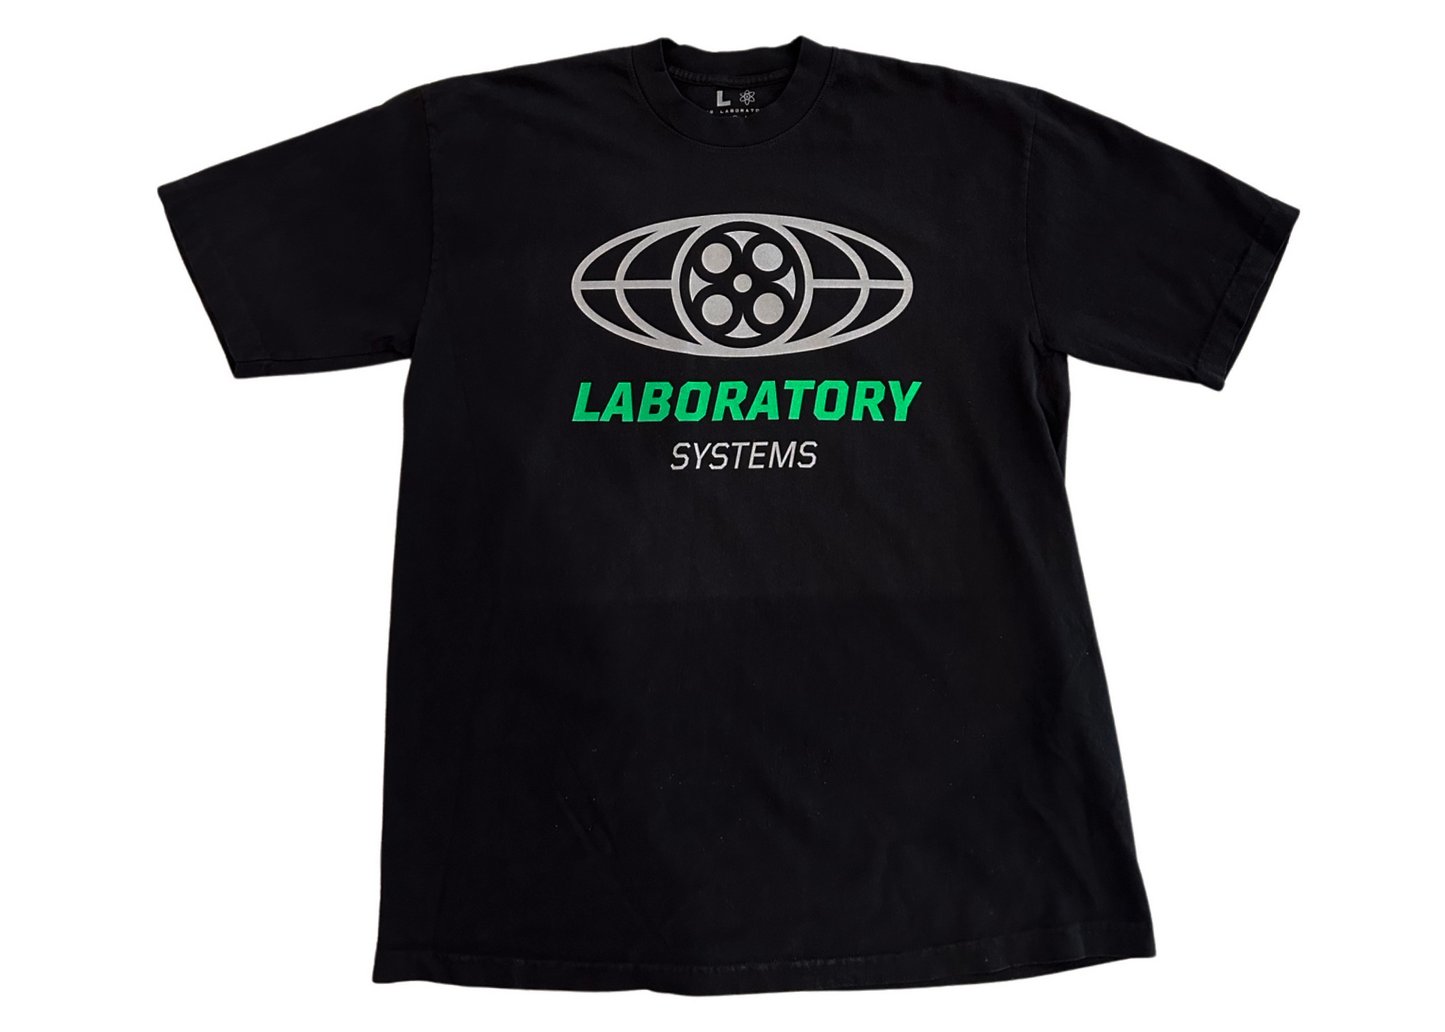 The Laboratory Systems Tee